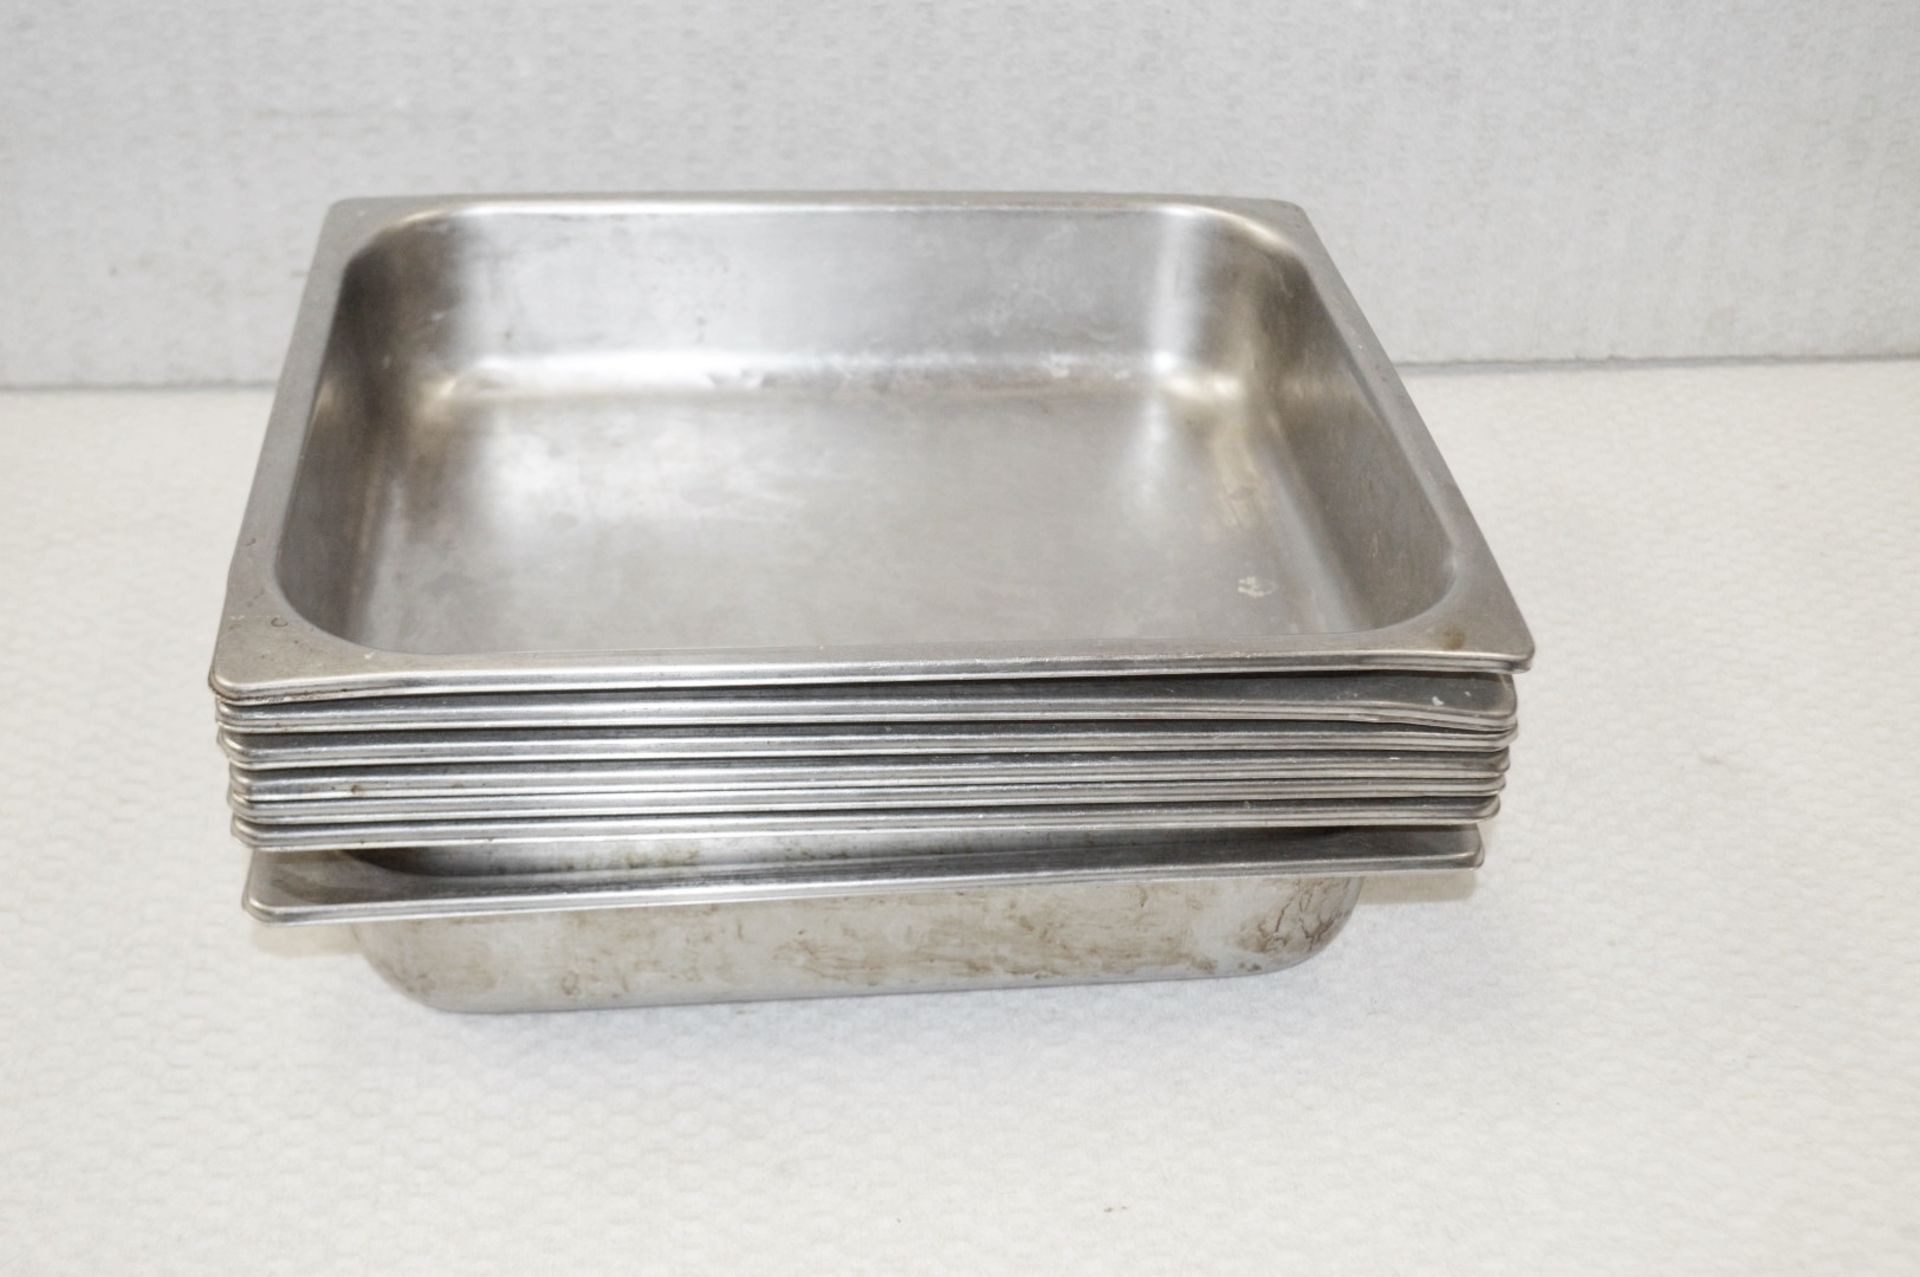 12 x Stainless Steel Gastronorm Trays - Dimensions: L32.5 x W16.5cm - Recently Removed From a - Image 2 of 3